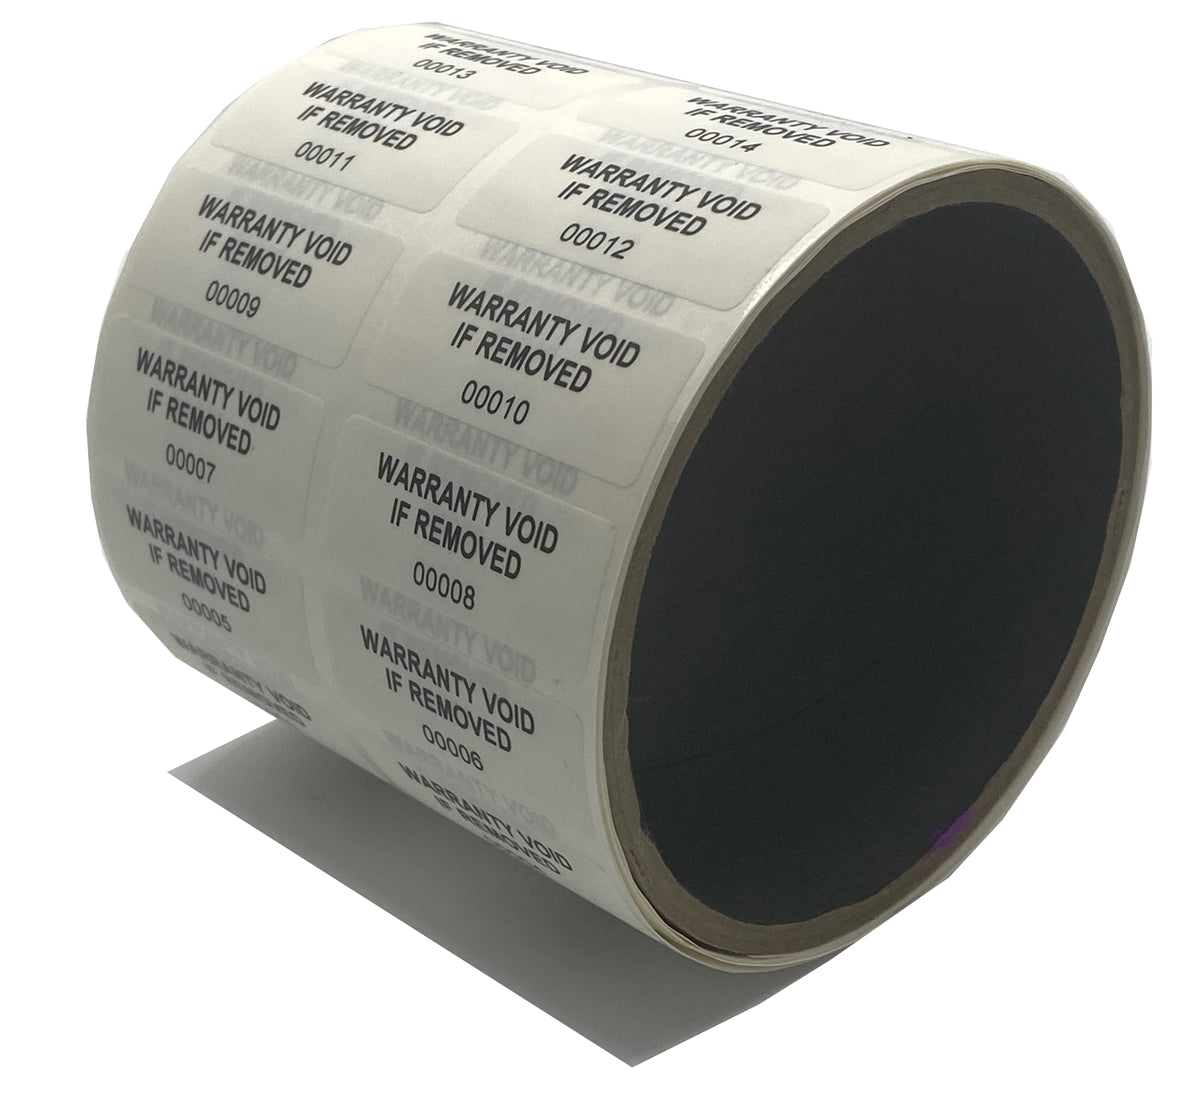 250 Tamper Evident White Non Residue Security Labels TamperGuard® Seal Sticker, Rectangle 1.5" x 0.6" (38mm x 15mm). Printed: Warranty Void if Removed + Serialized